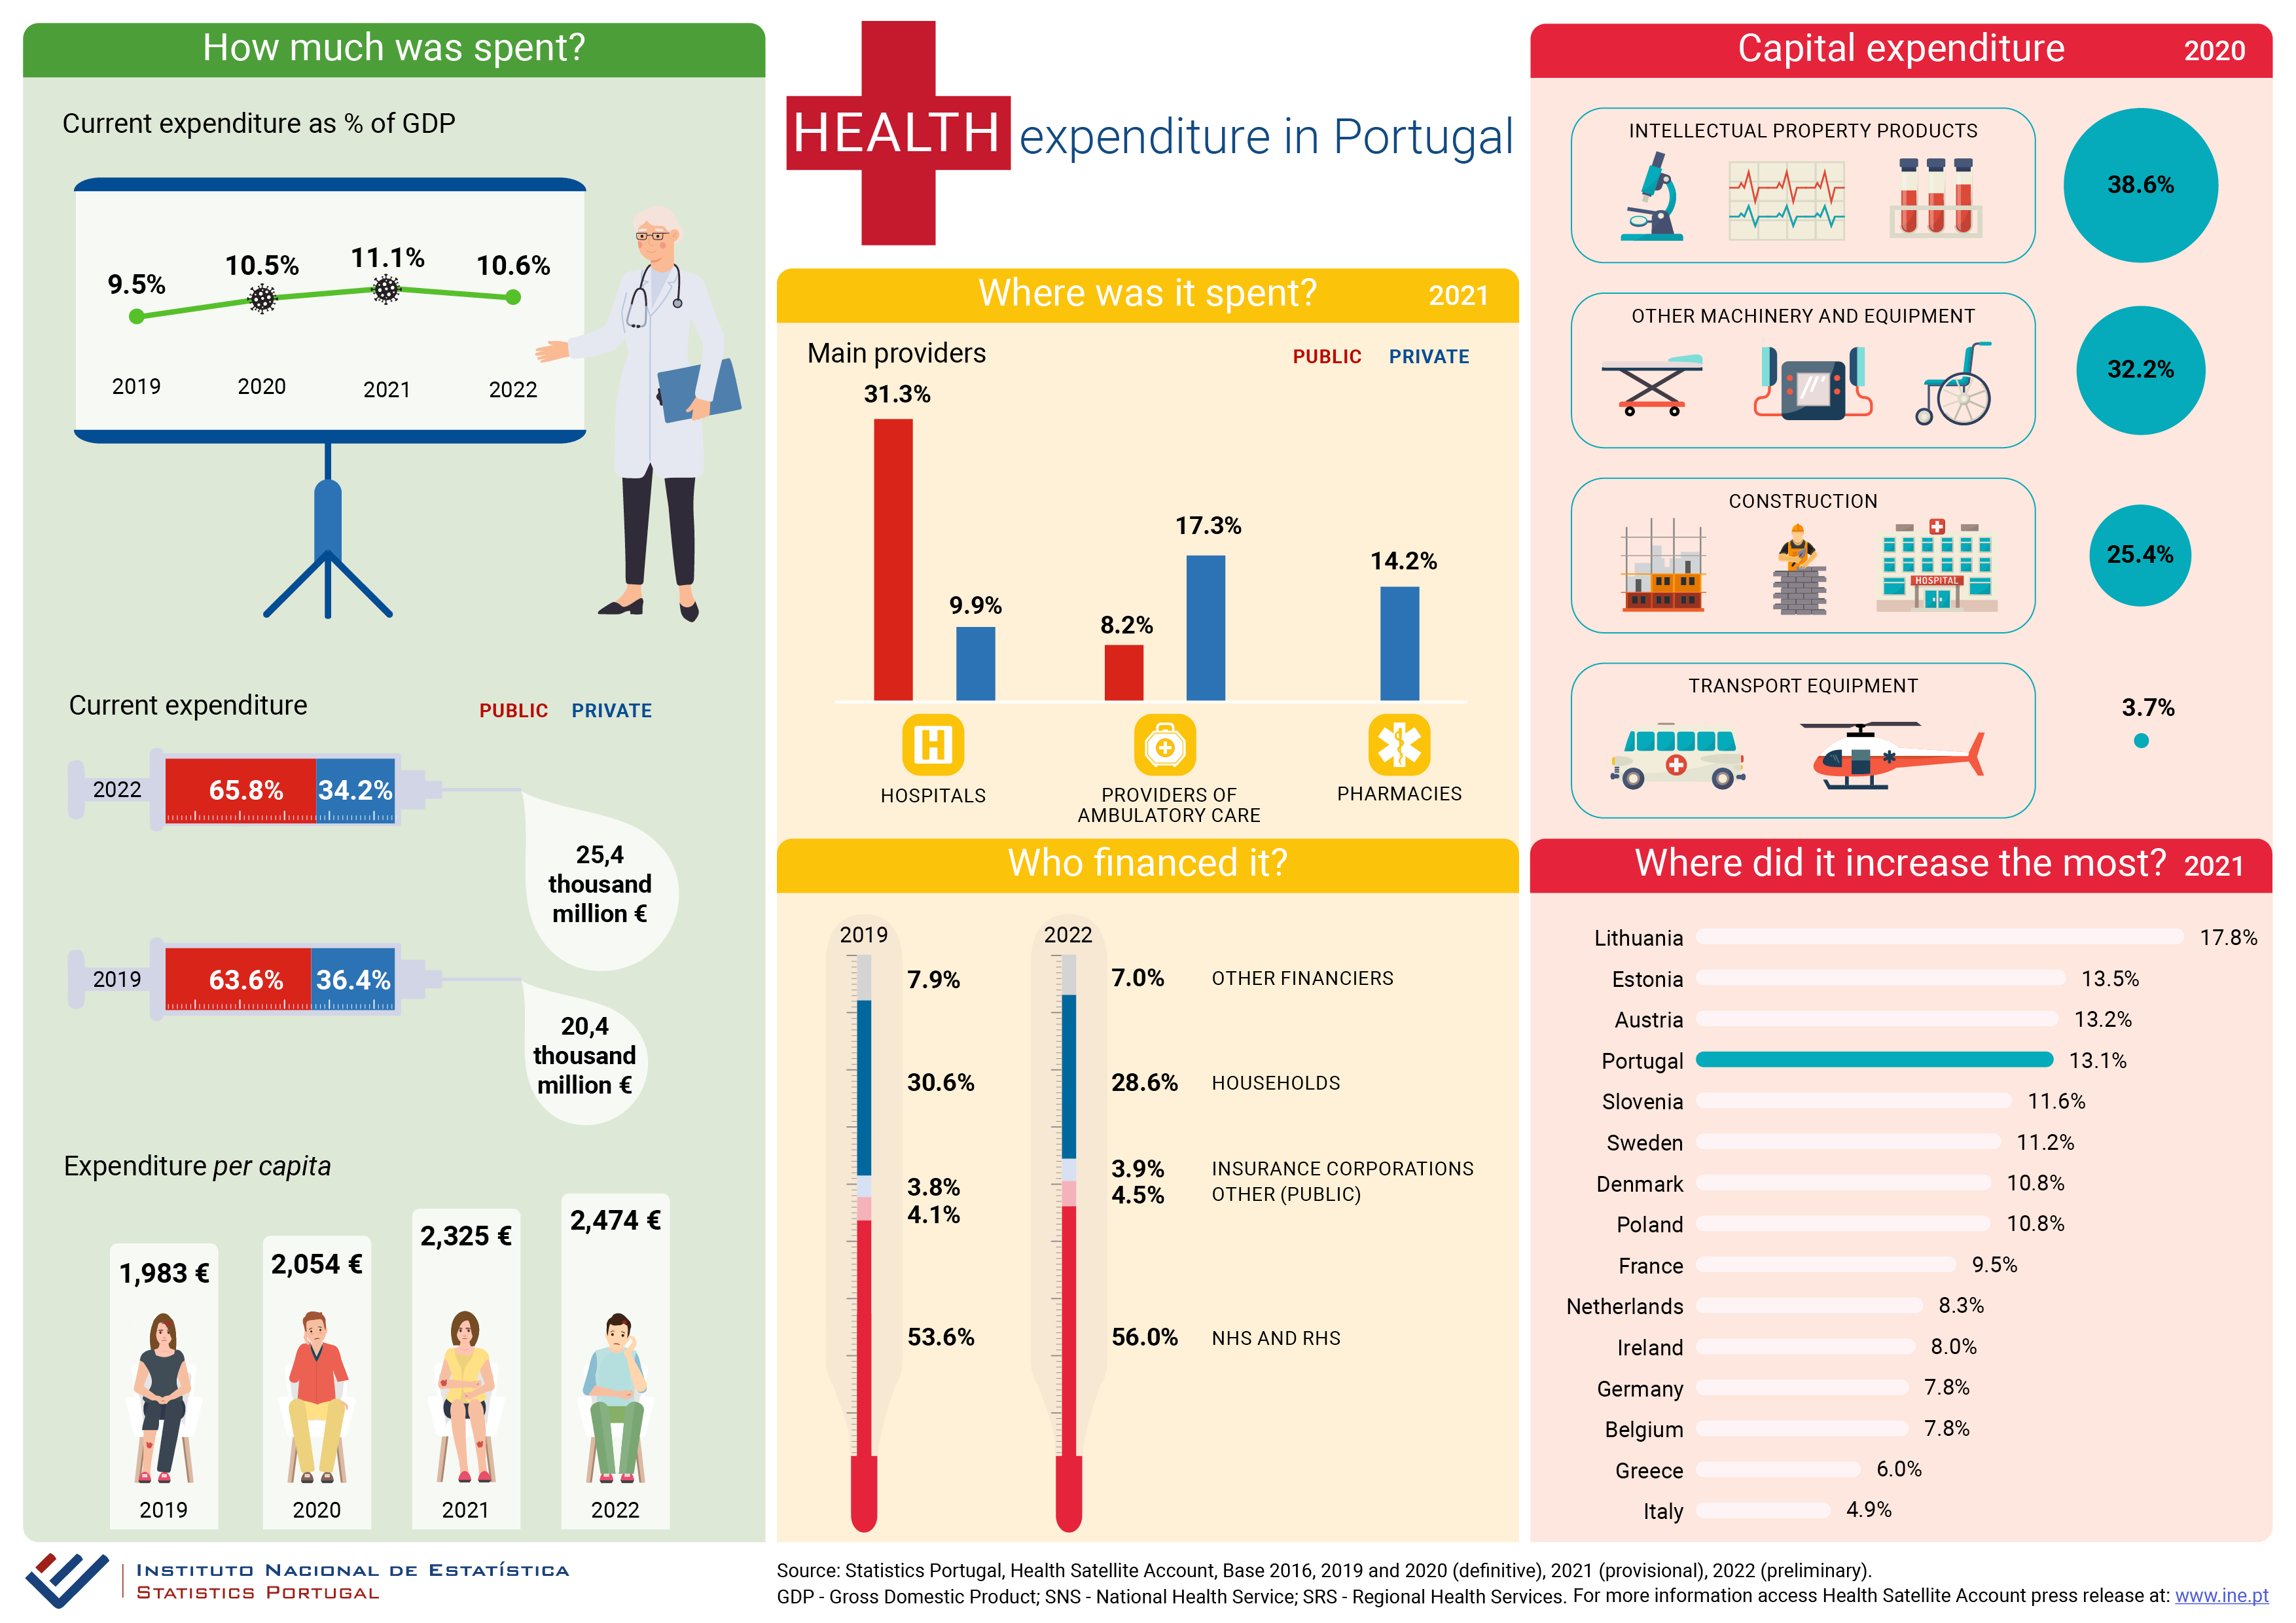 HEALTH expenditure in Portugal